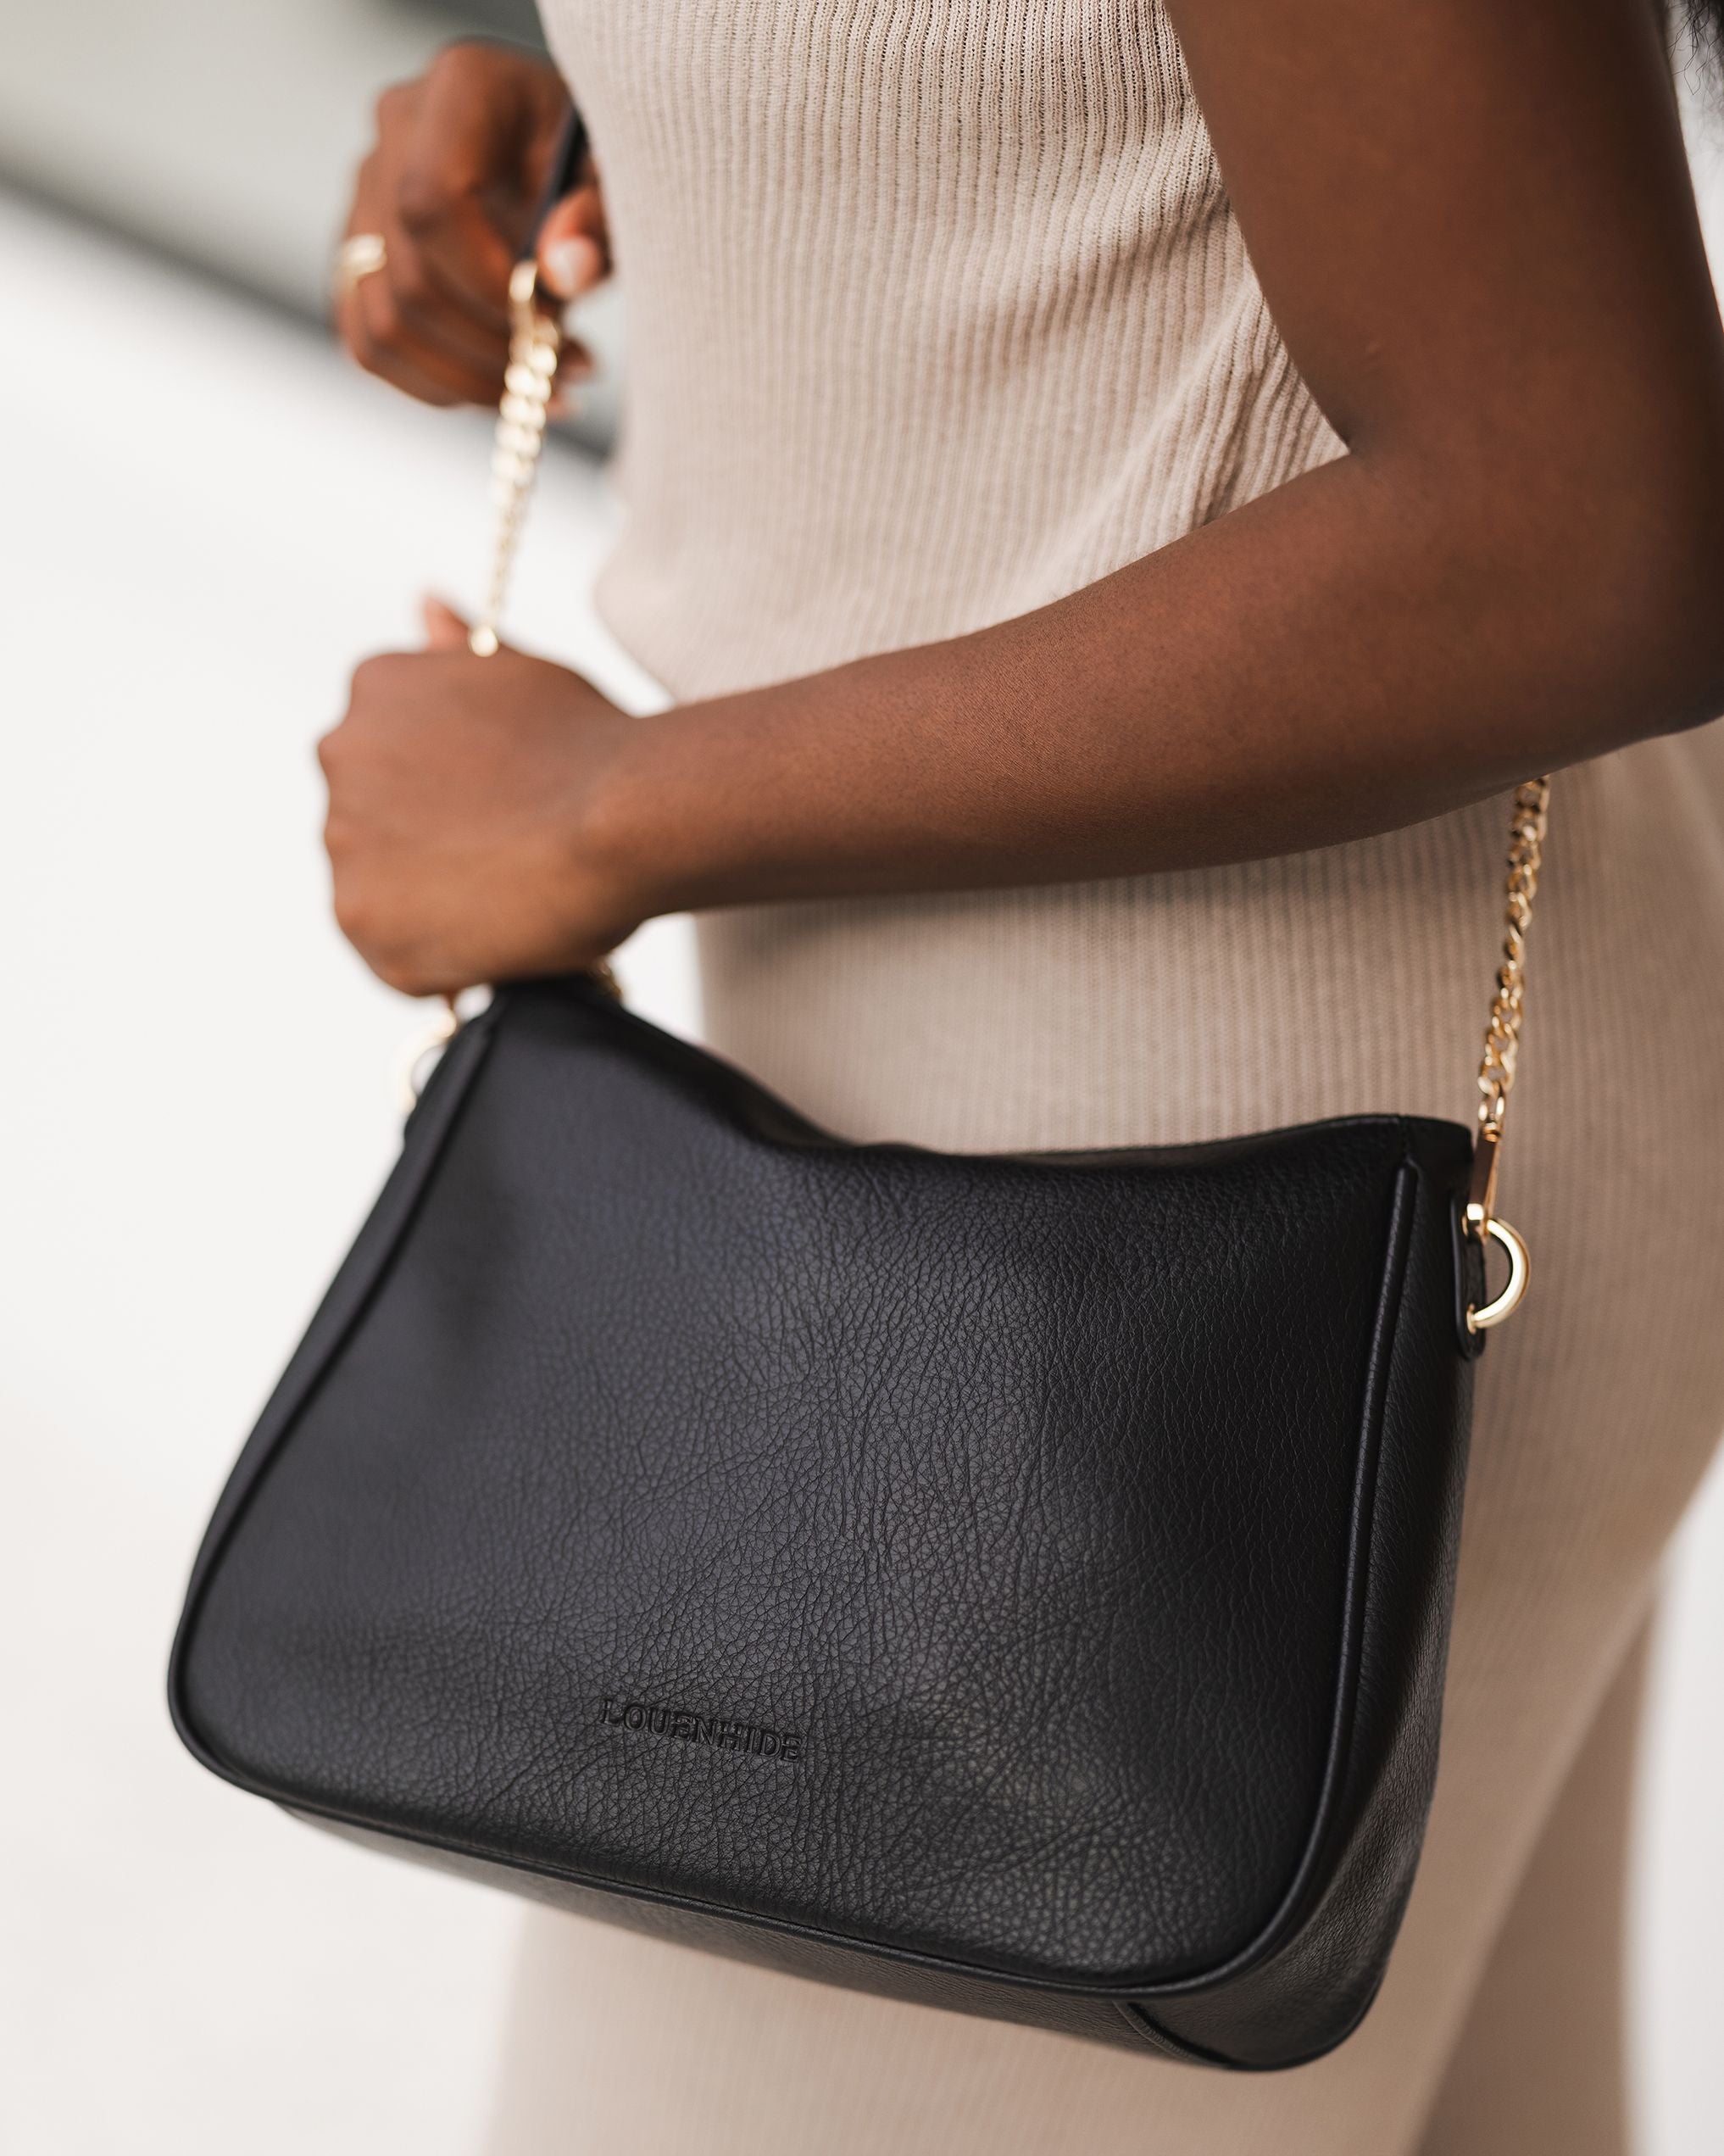 The Louenhide Baby Remi Shoulder Bag is a classic women's everyday bag with elevated style. Designed in a soft and slouchy silhouette with smooth vegan leather, this casual hobo bag is sure to turn heads with its timeless knot detailing strap feature.